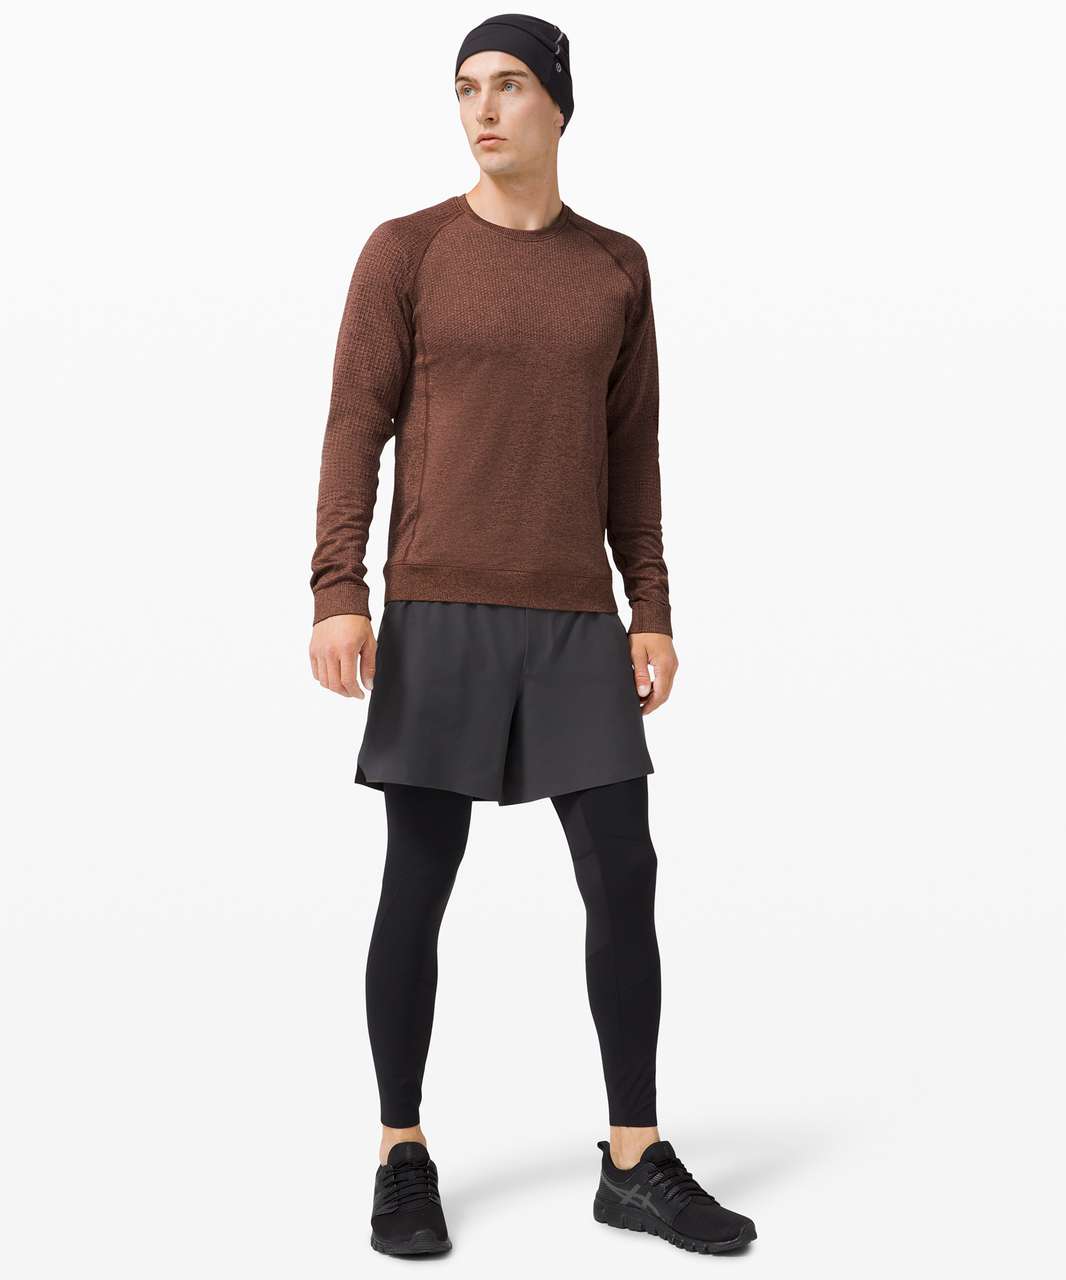 Lululemon Engineered Warmth Long Sleeve - Ancient Copper / Cassis